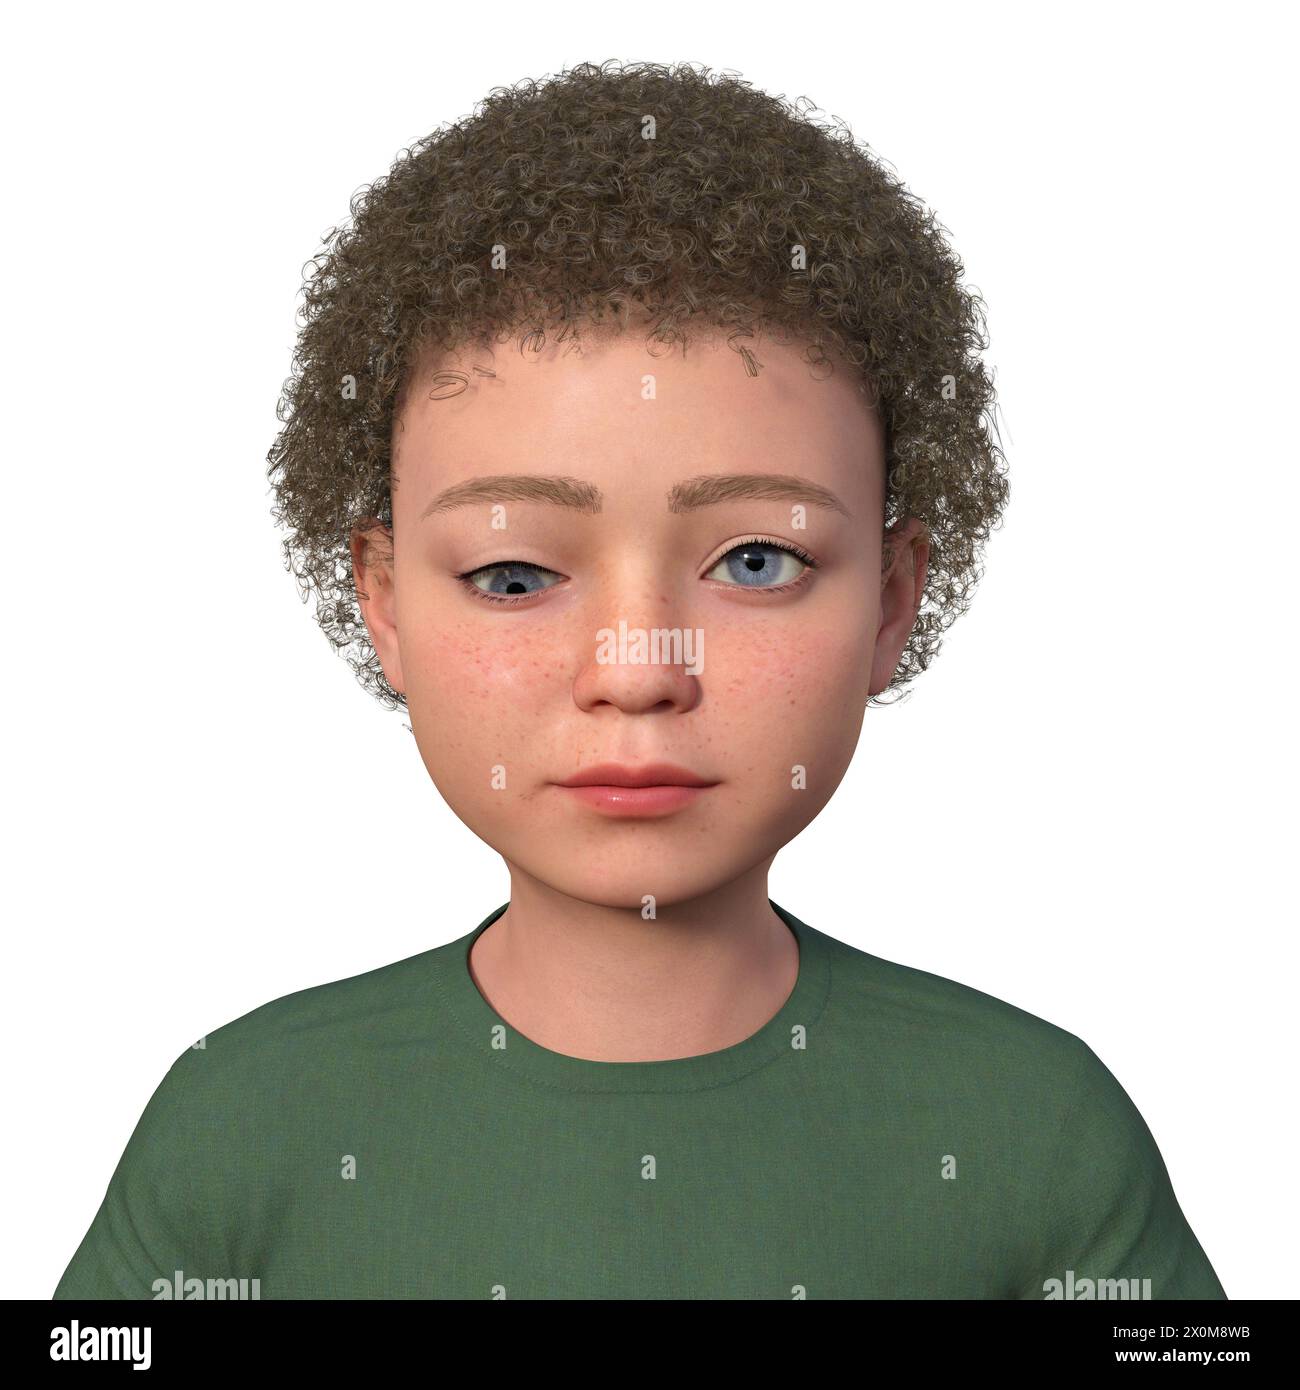 Illustration of a child with hypotropia displaying downward eye misalignment. Stock Photo